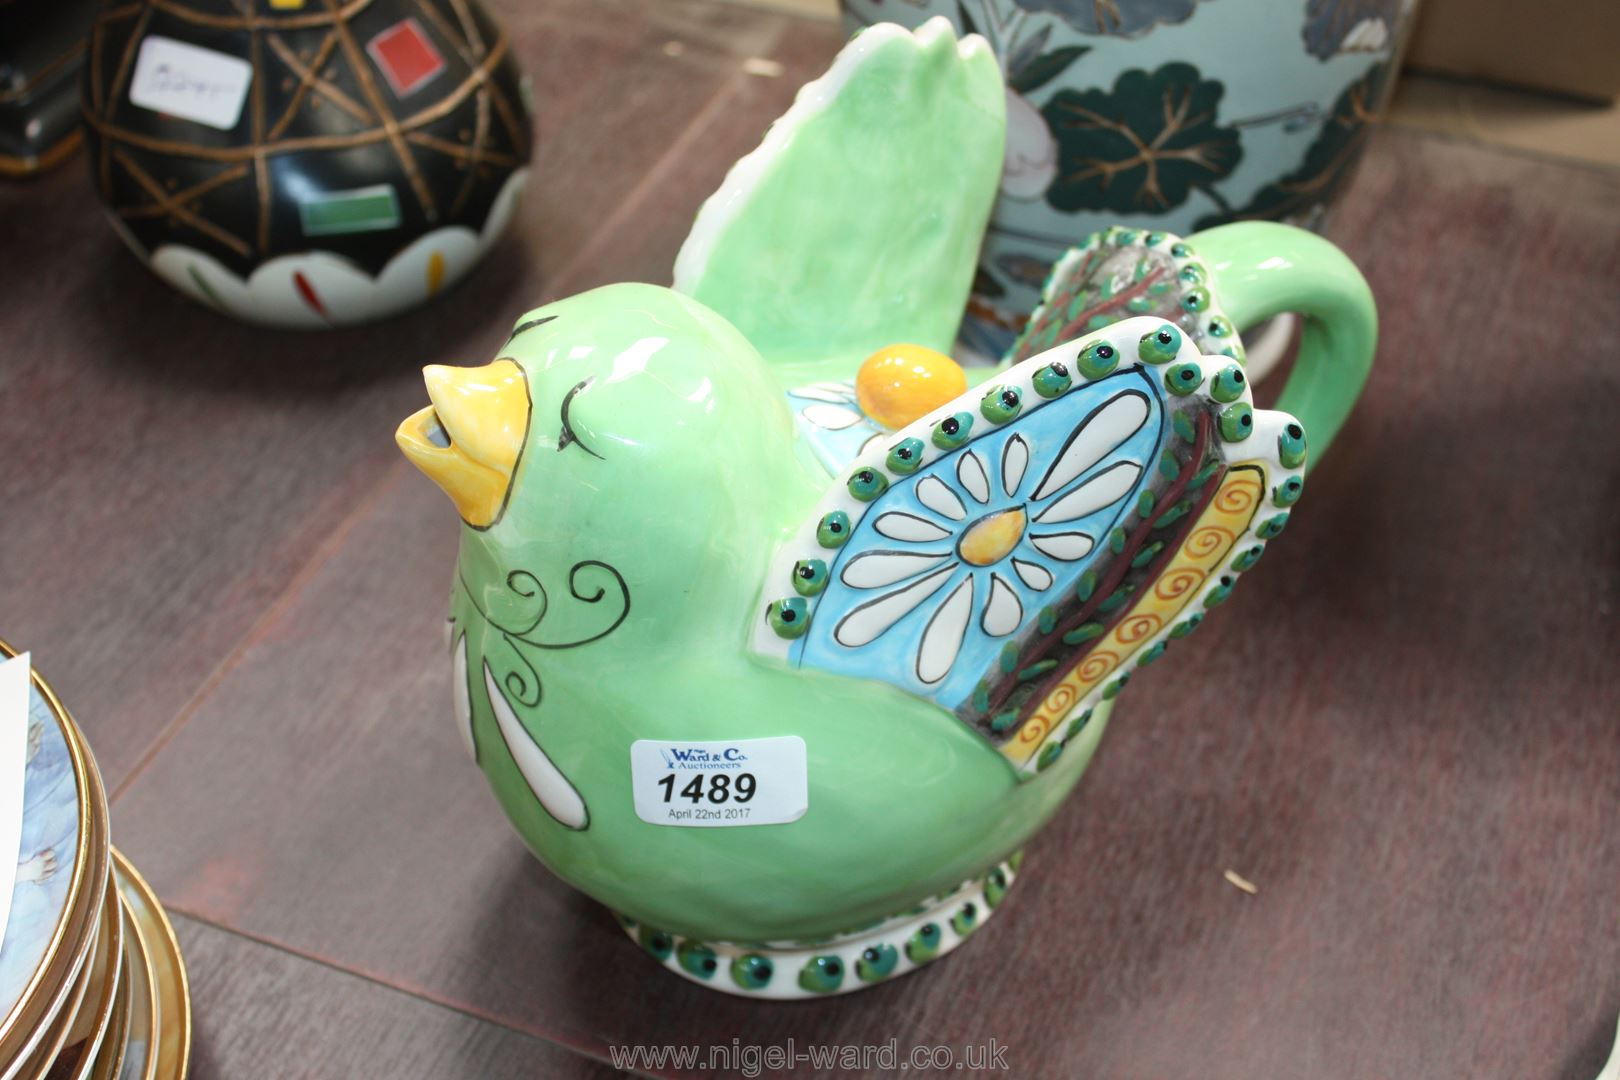 A decorative Teapot in the form of a stylised bird by Heather Goldminc